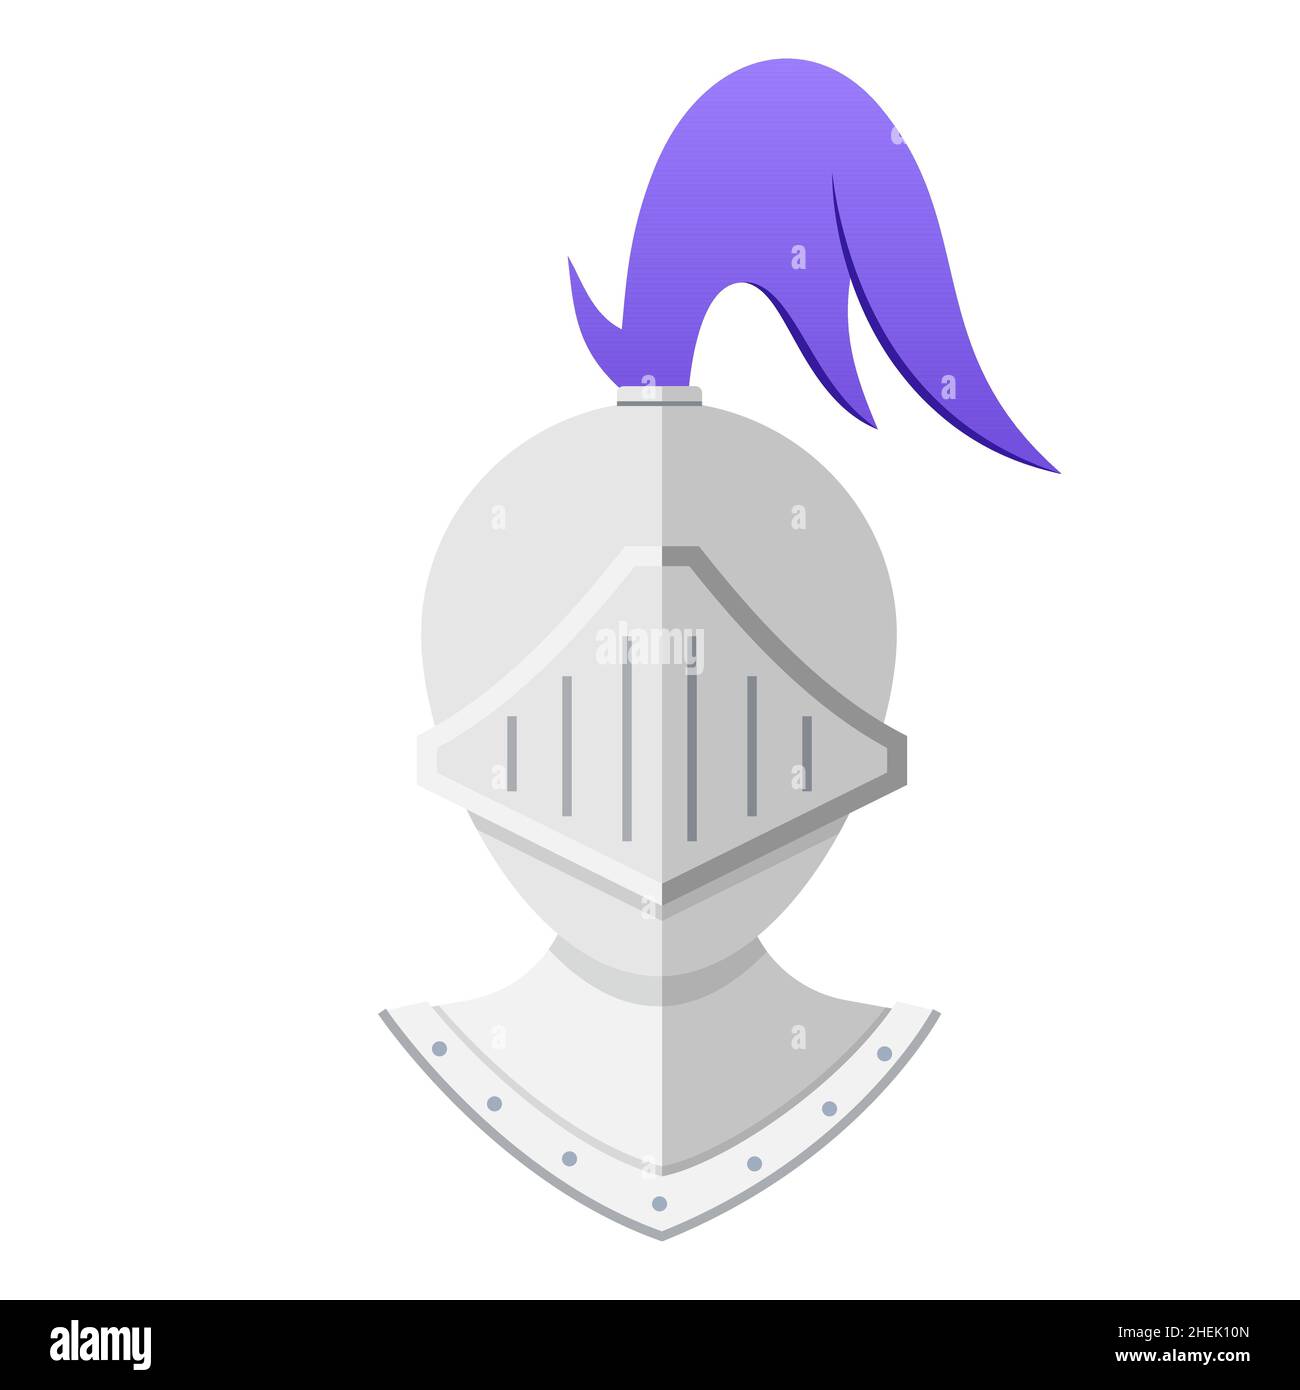 Knights helmet - modern flat design style single isolated object. Neat detailed image of iron armor with a large purple feather on its head. Medieval Stock Vector